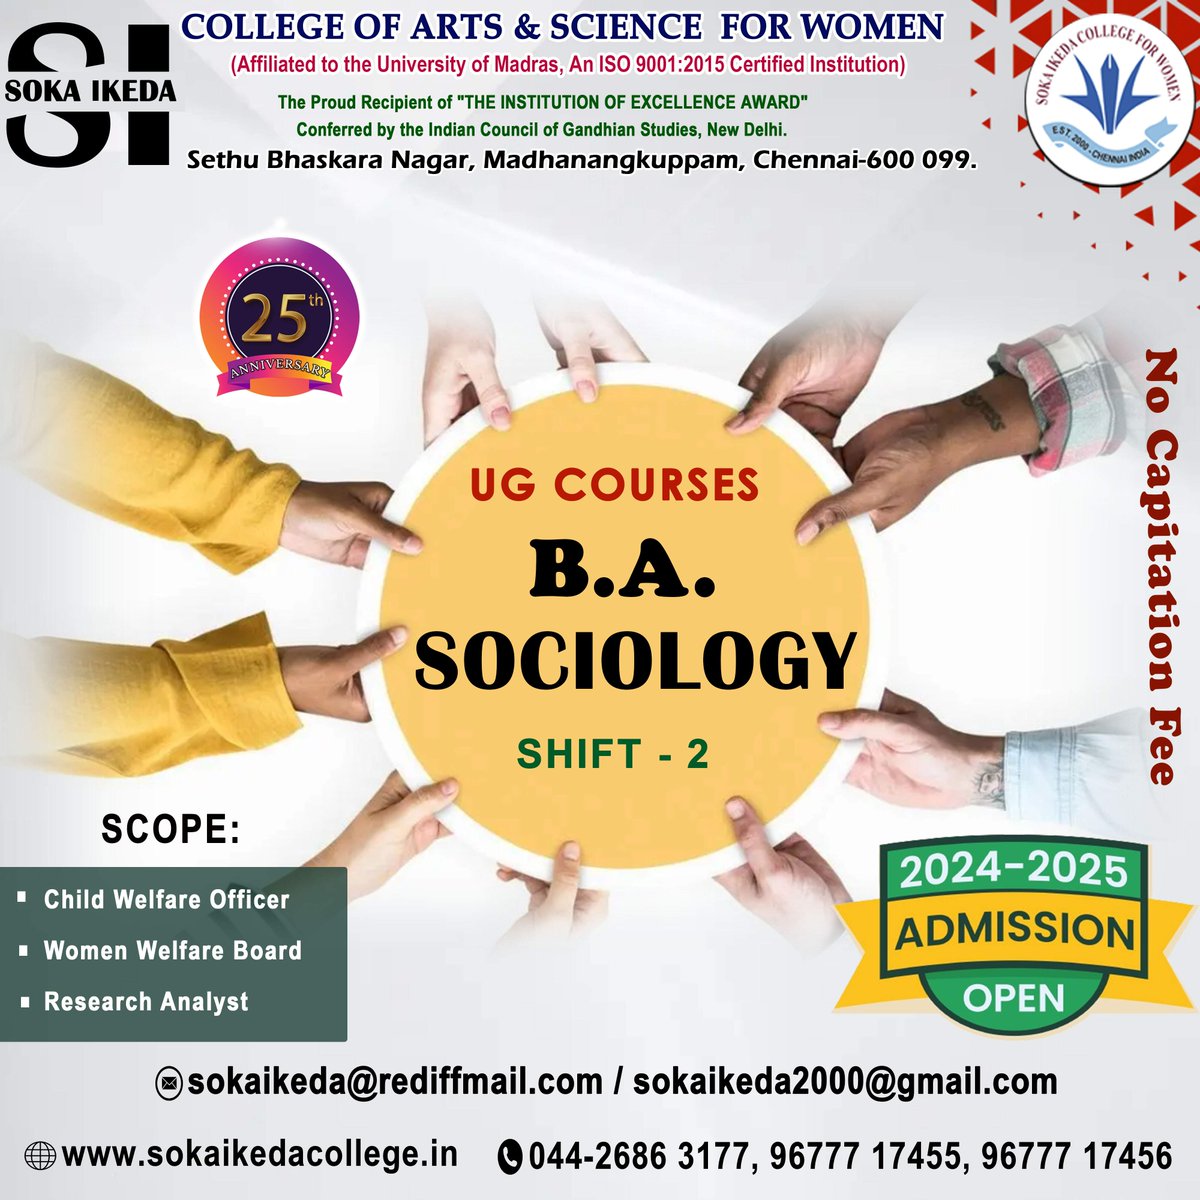 𝐀𝐝𝐦𝐢𝐬𝐬𝐢𝐨𝐧 𝐎𝐩𝐞𝐧 𝟐𝟎𝟐𝟒-𝟐𝟎𝟐𝟓
B.A. Sociology (shift- 2)

𝐒𝐨𝐤𝐚 𝐈𝐤𝐞𝐝𝐚 𝐂𝐨𝐥𝐥𝐞𝐠𝐞 𝐨𝐟 𝐀𝐫𝐭𝐬 𝐚𝐧𝐝 𝐒𝐜𝐢𝐞𝐧𝐜𝐞 𝐟𝐨𝐫 𝐖𝐨𝐦𝐞𝐧
Online Admission : sokaikedacollege.in/#/online-submi…
#admissionsopen2024 #BA #Sociology #nocapitationfee #sokaikeda